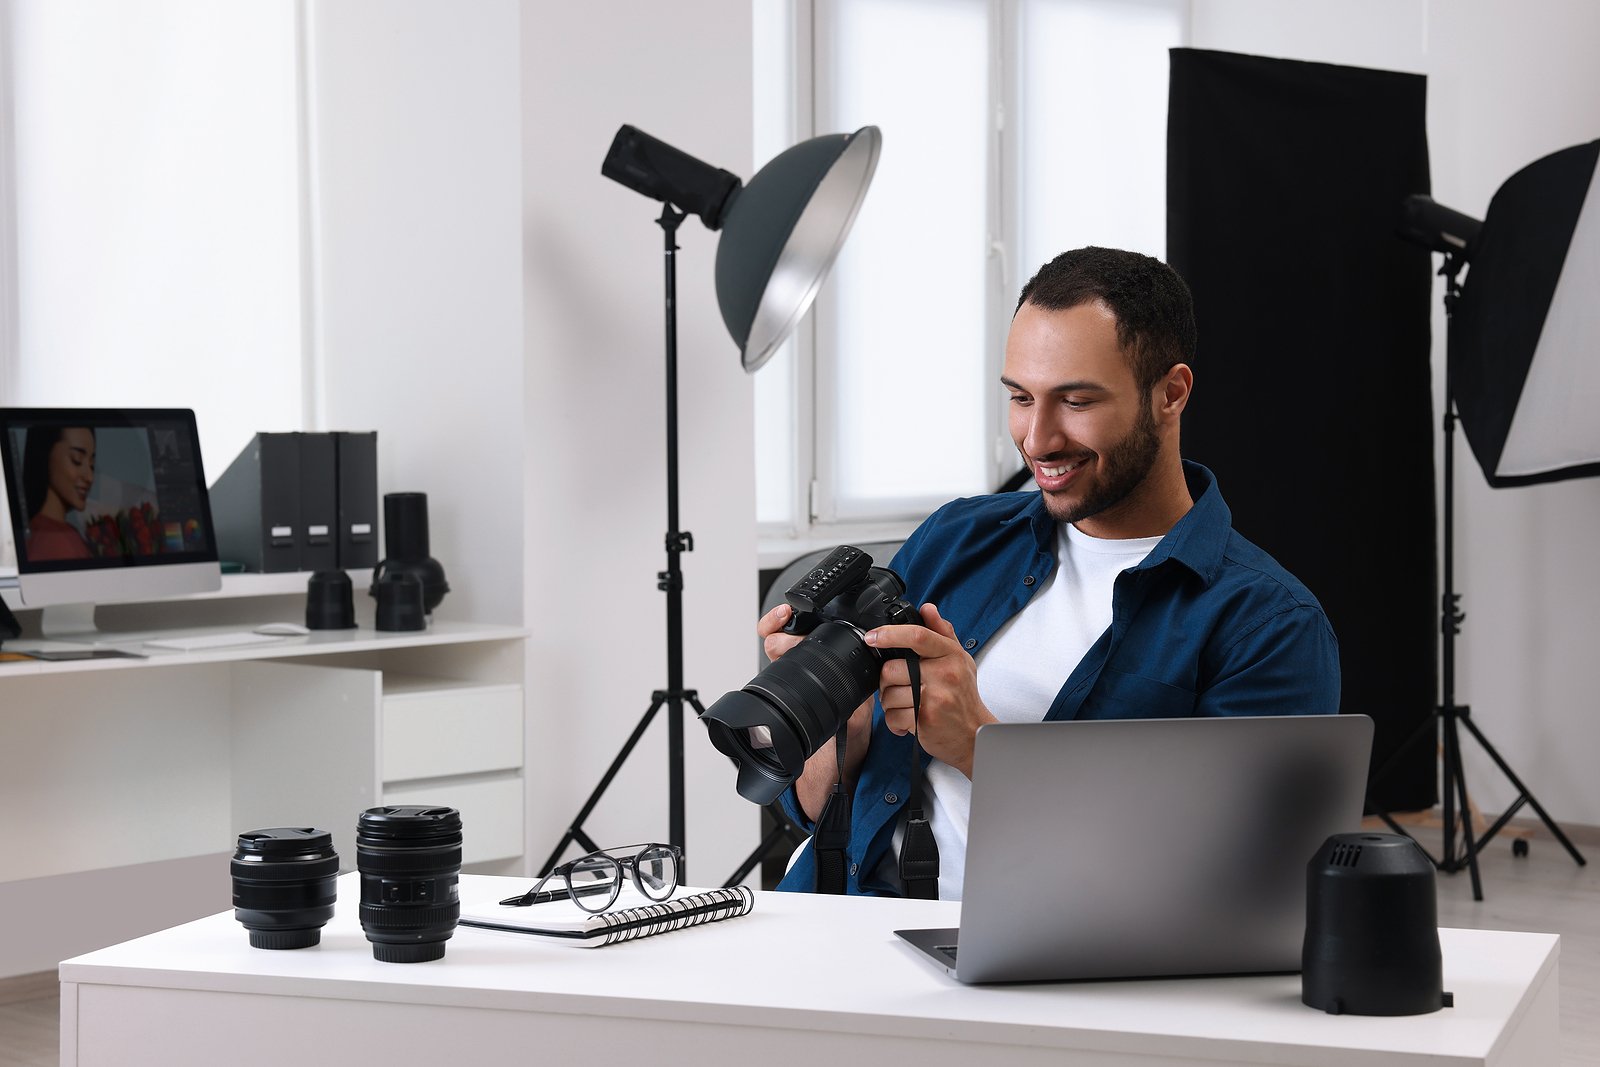 photographer in a photo studio looking at his camera.